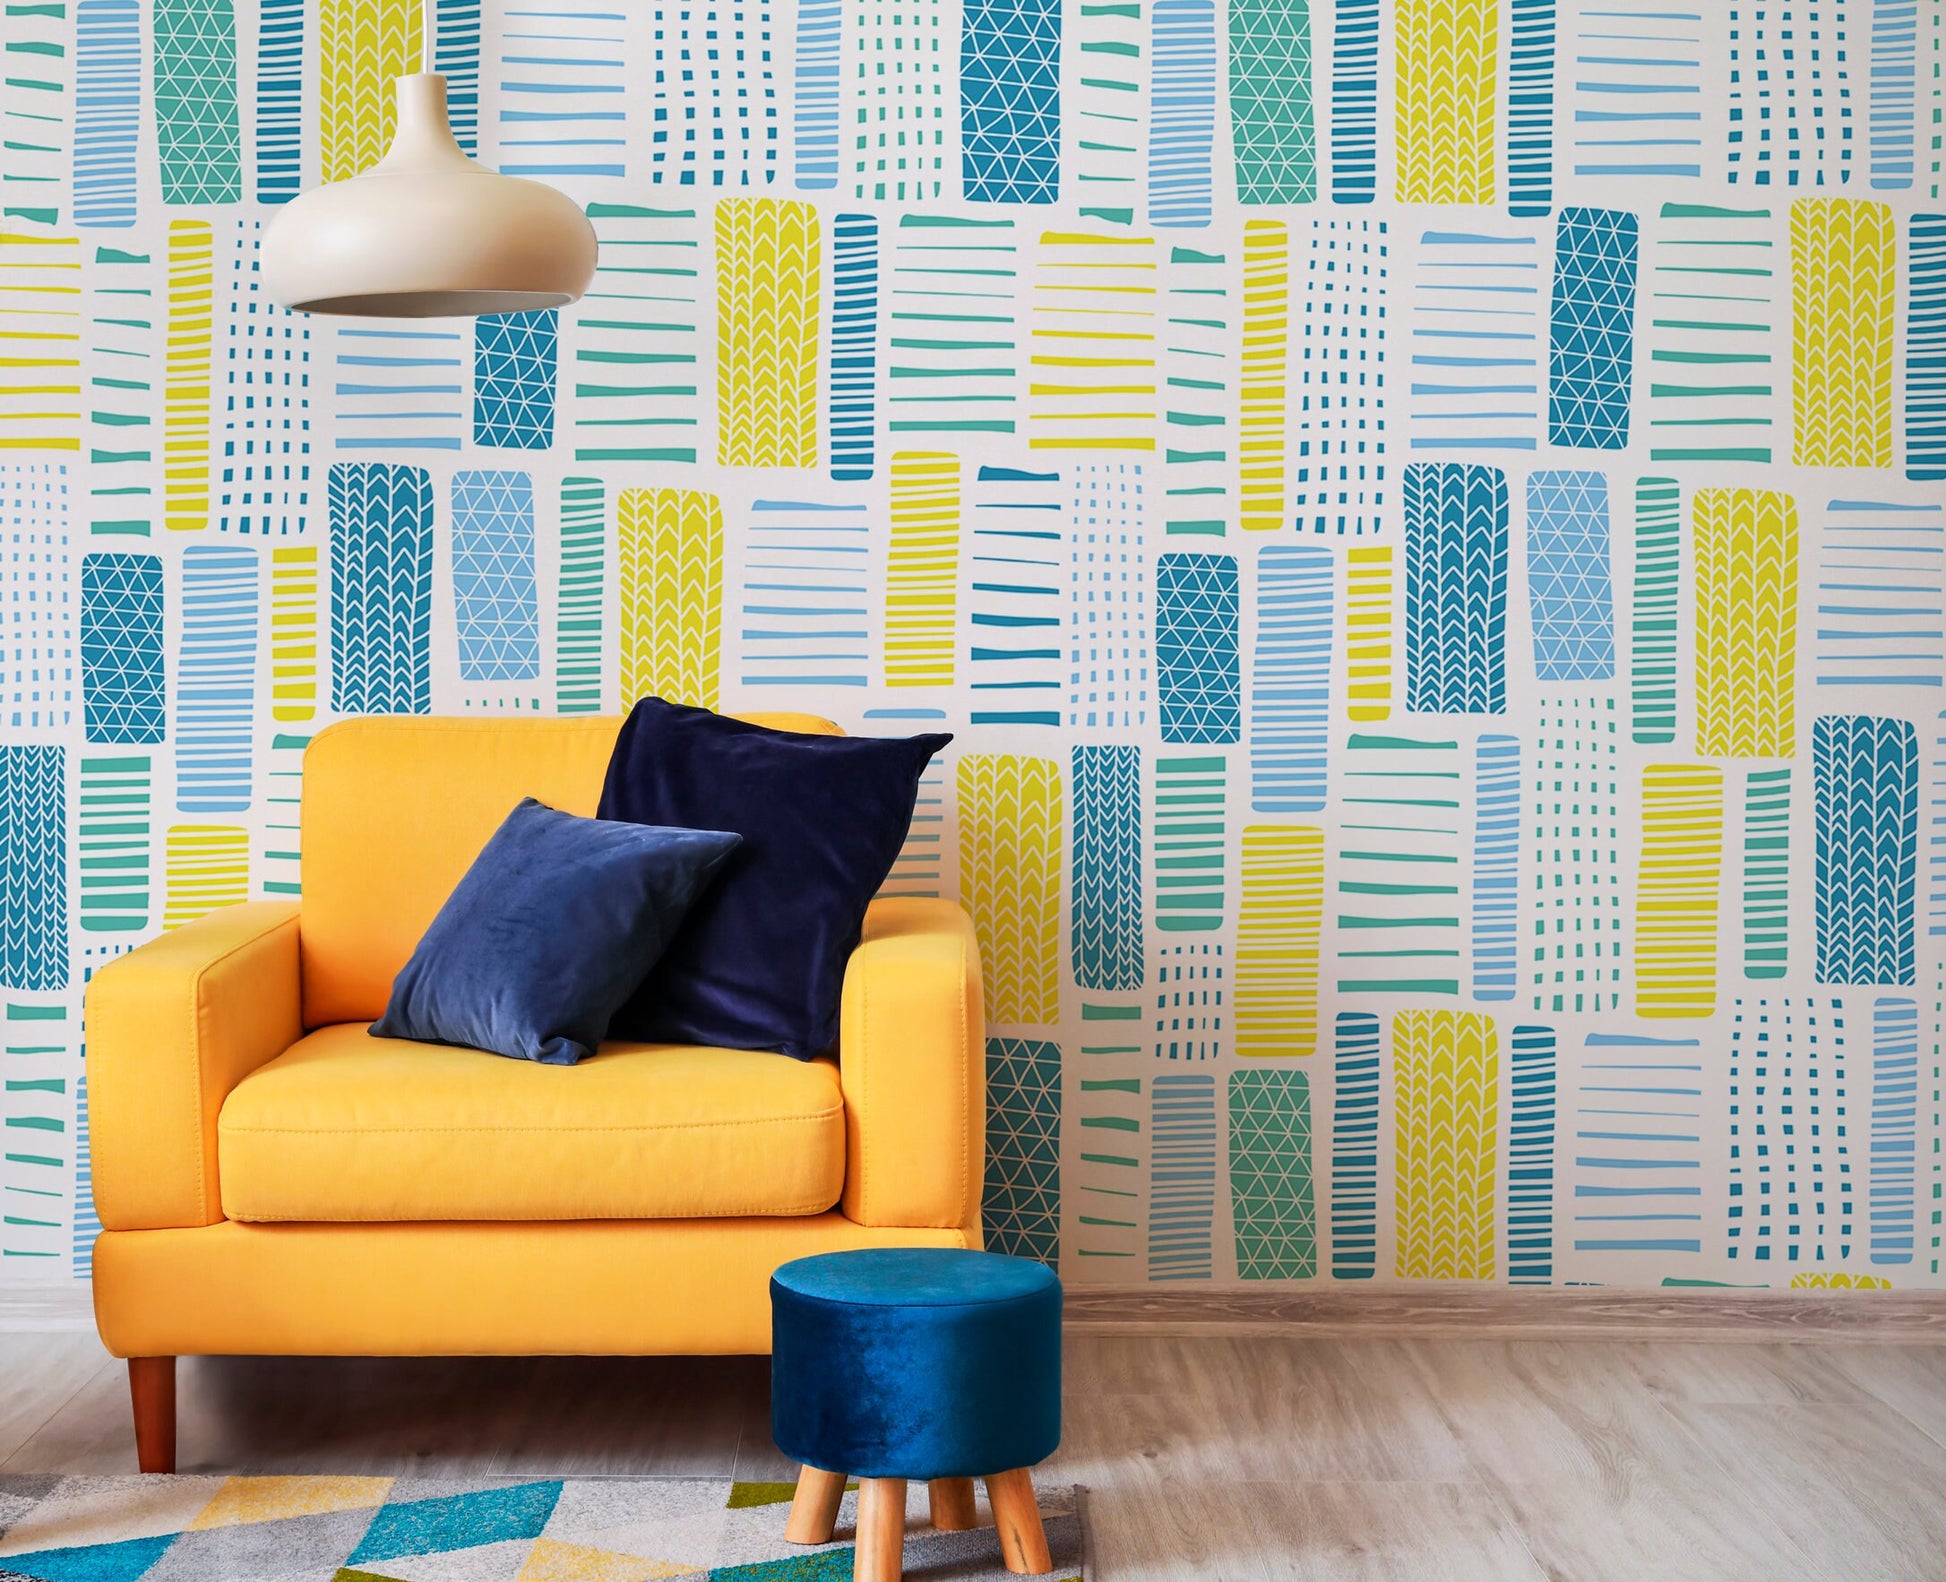 Wallpaper Peel and Stick Wallpaper Removable Wallpaper Home Decor Wall Art Wall Decor Room Decor / Yellow and Blue Abstract Wallpaper - B318